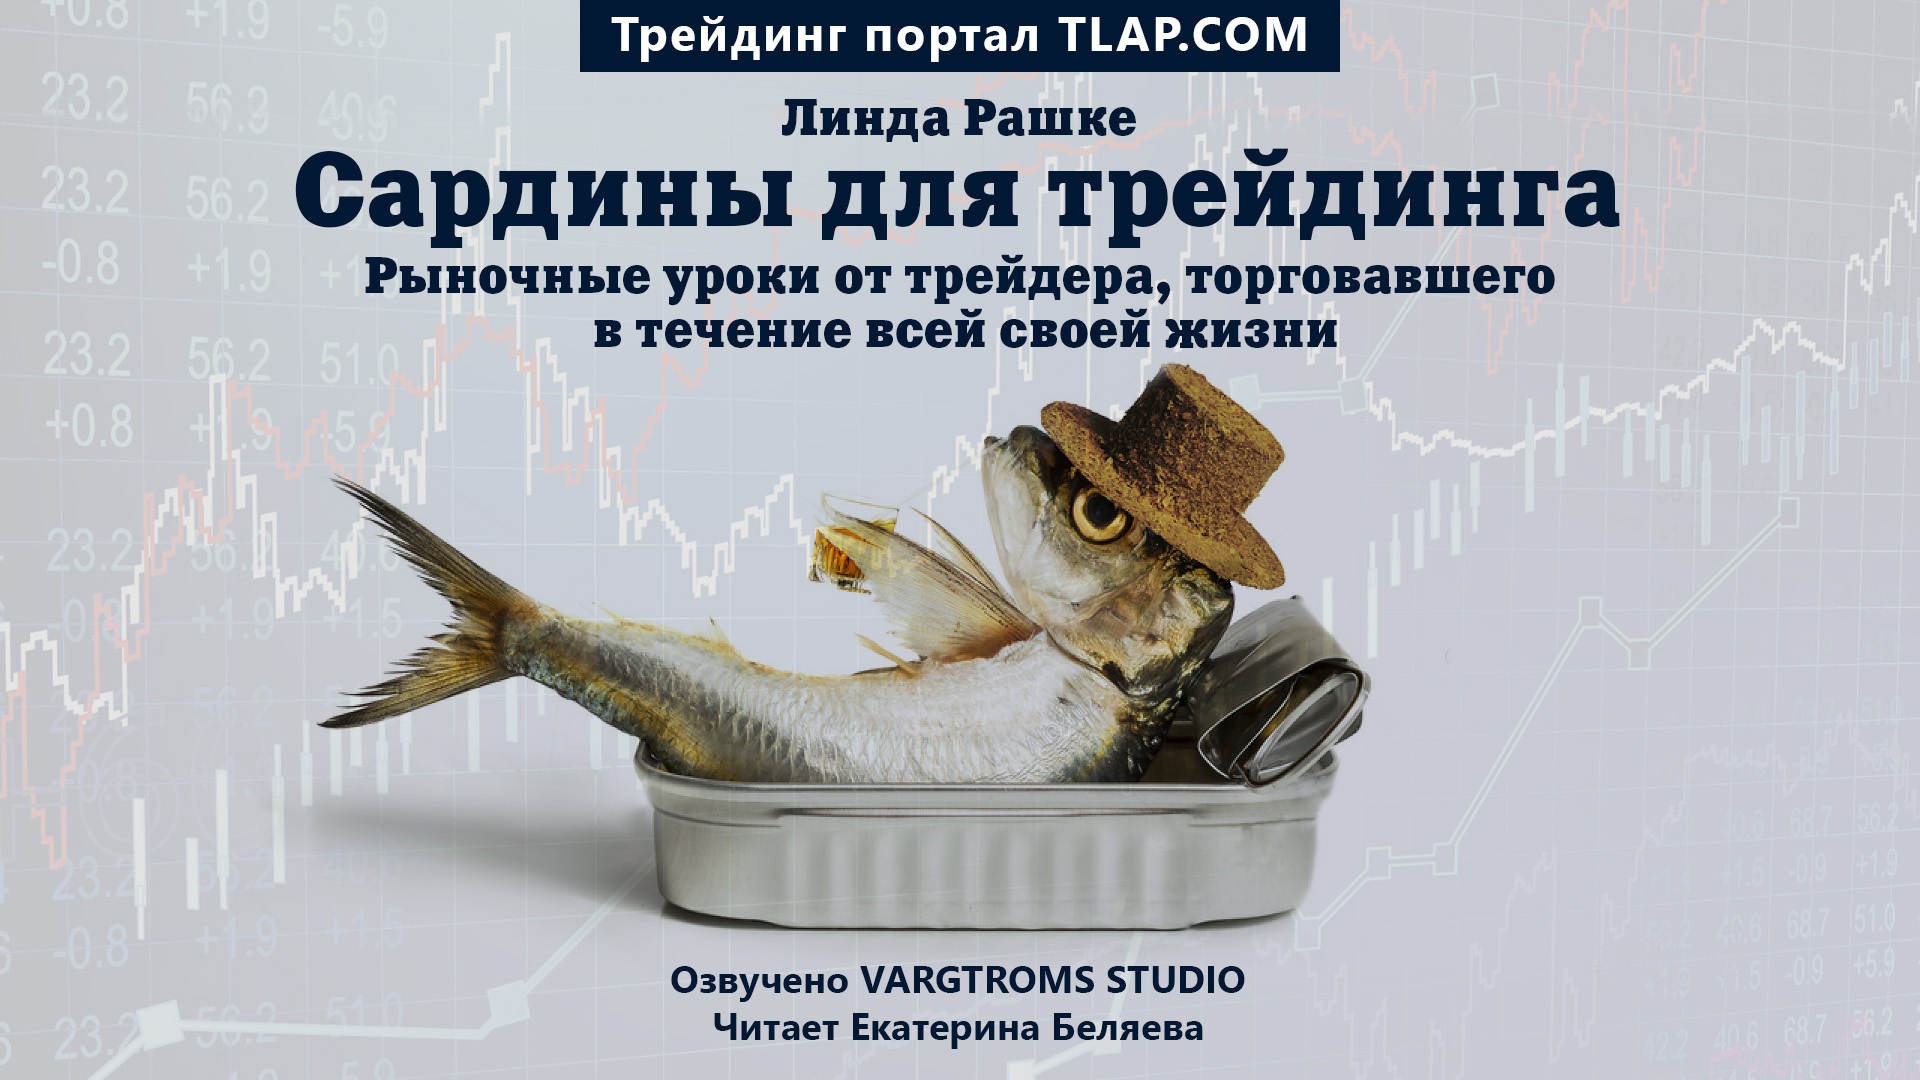 Trading sardines lessons in the markets from a lifelong trader